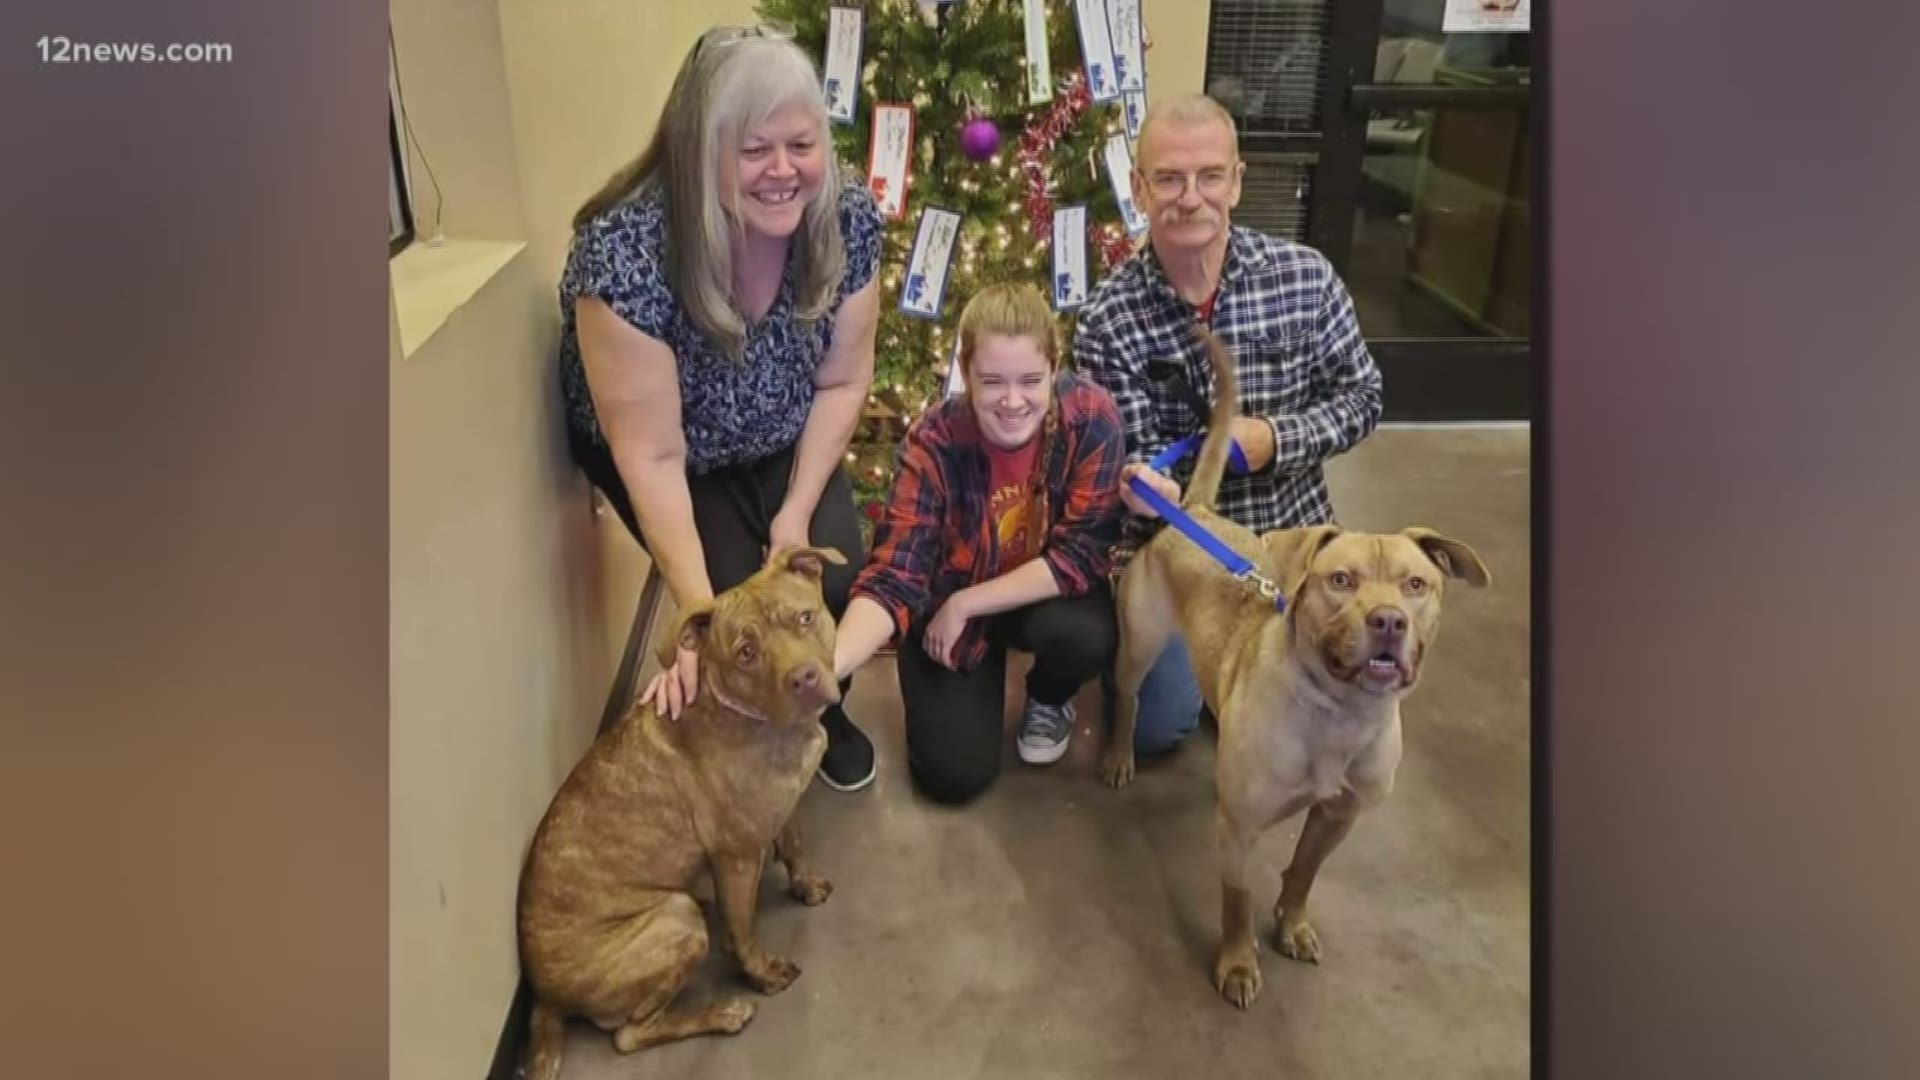 Monkey, a pit bull mix, was dropped off at a Phoenix shelter last Christmas Eve, and after almost a full year, he finally got his Christmas wish: A family.